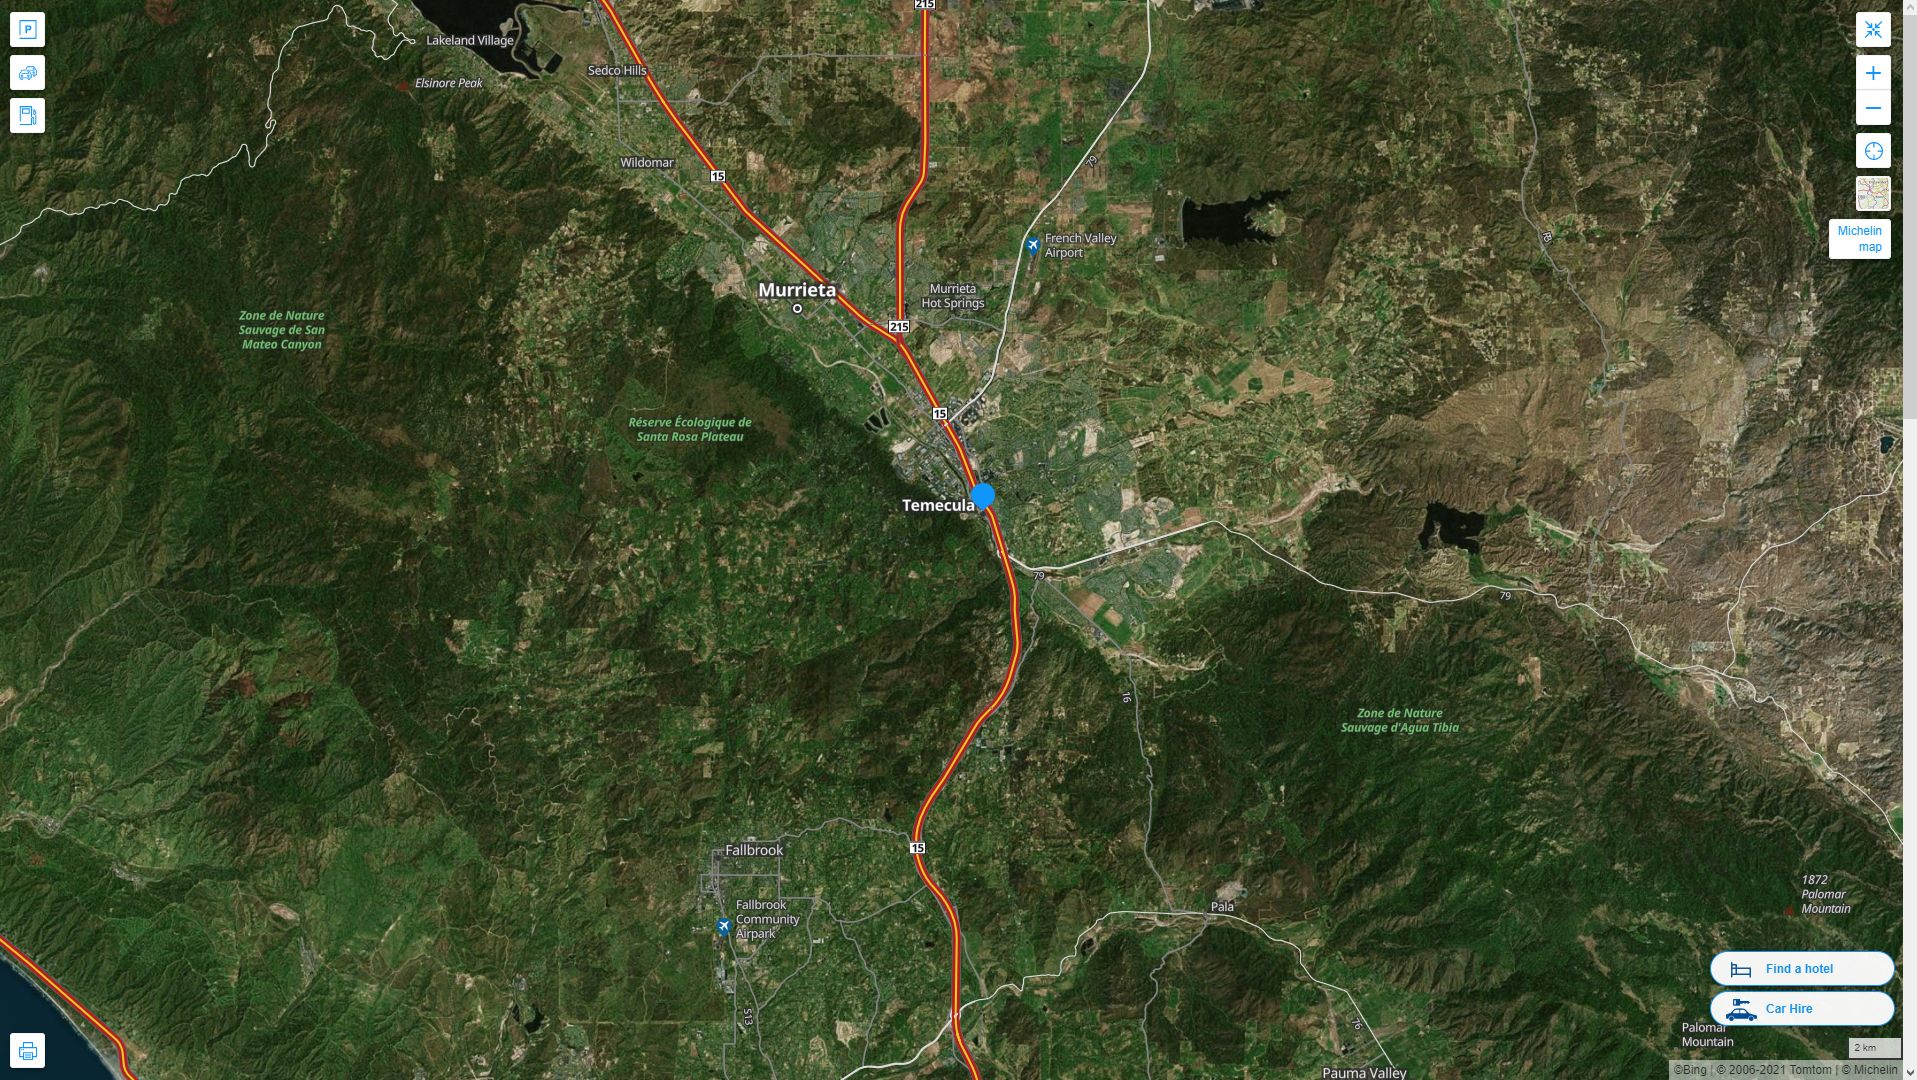 Temecula California Highway and Road Map with Satellite View